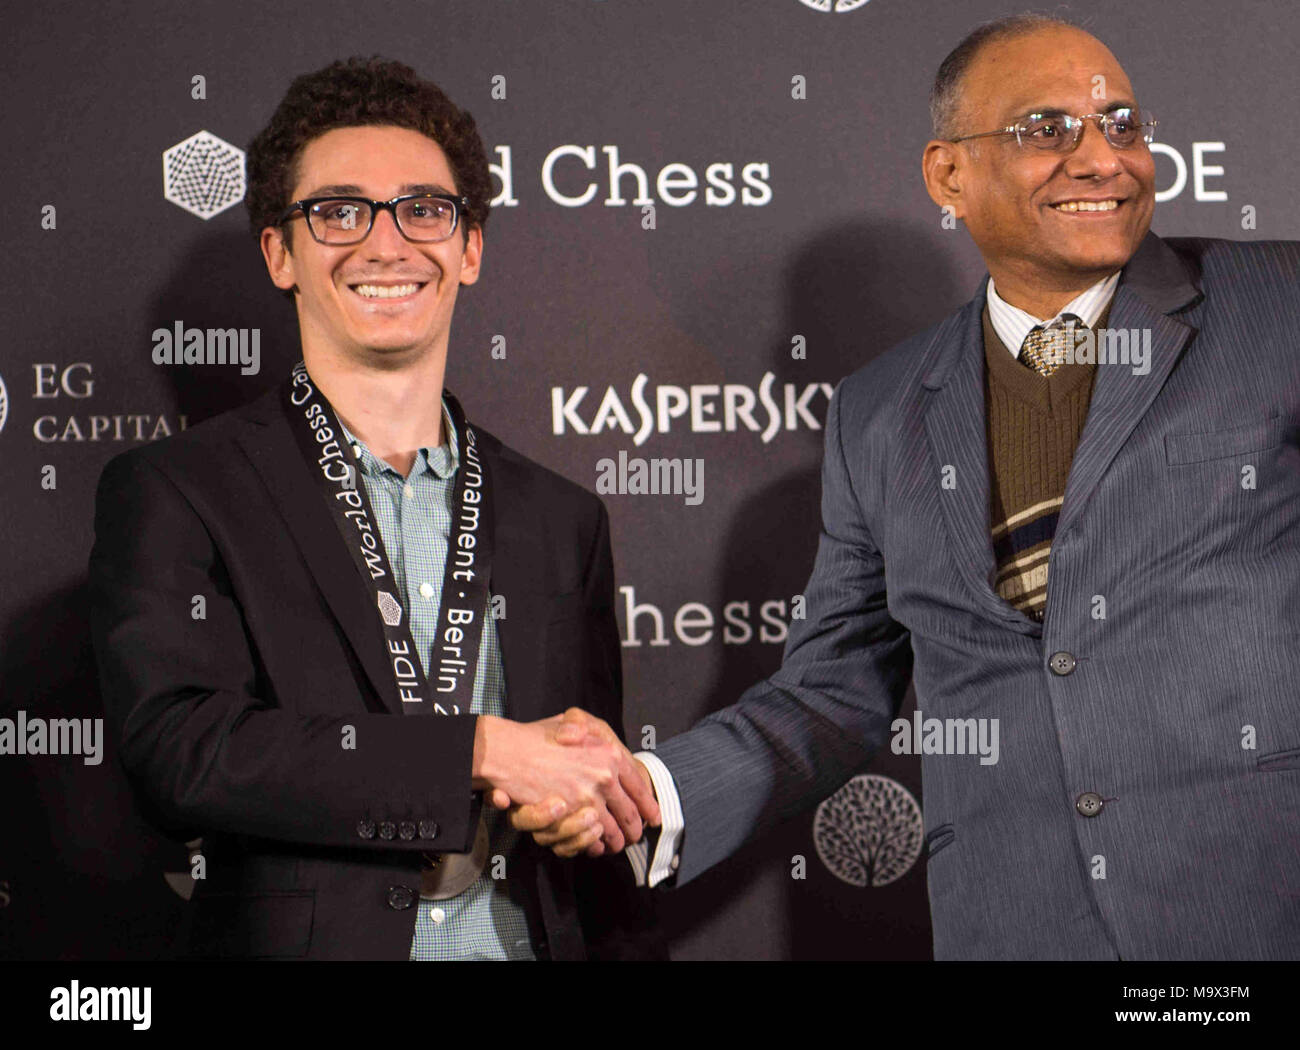 27 March 2018, Germany, Berlin: Vice-president of the International Chess Organisation FIDE, Damal Villivalam (R), congratulating American and Italian chess grand master, Fabiano Caruana (C), on the last day of the '